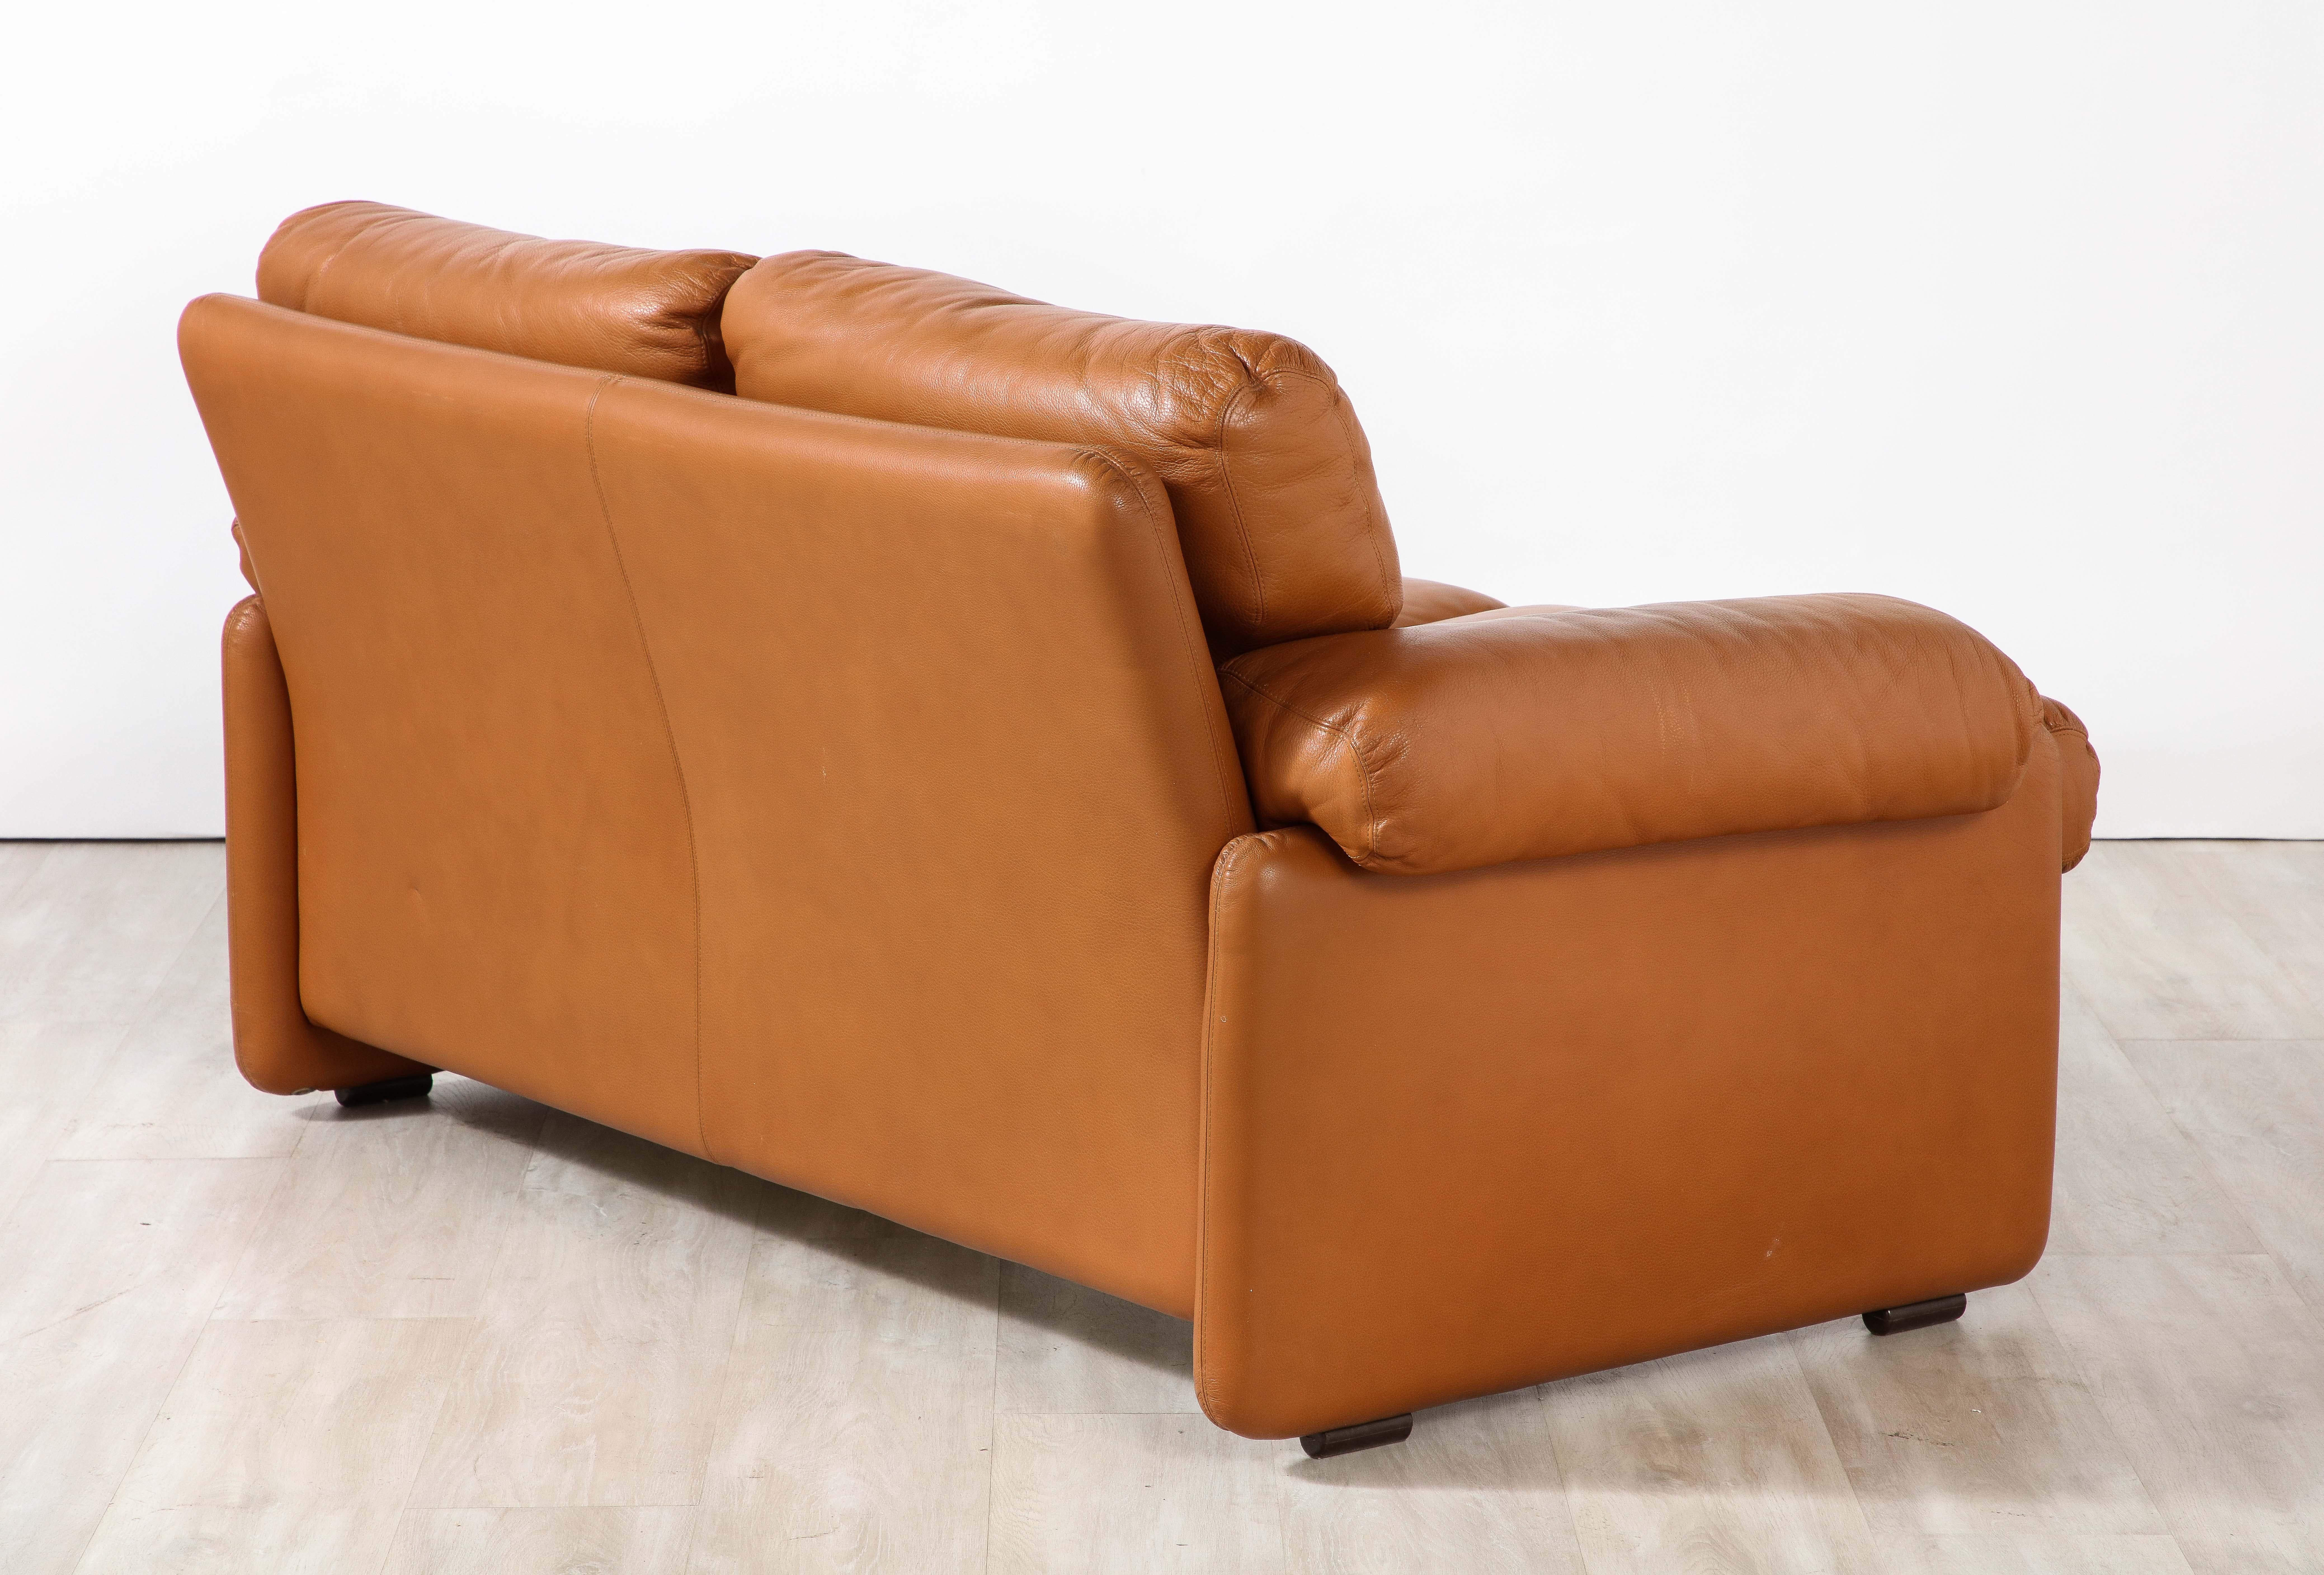 Pair of Tobia Scarpa Coronado Leather Sofas for B&B Italia, 1975 In Good Condition For Sale In New York, NY